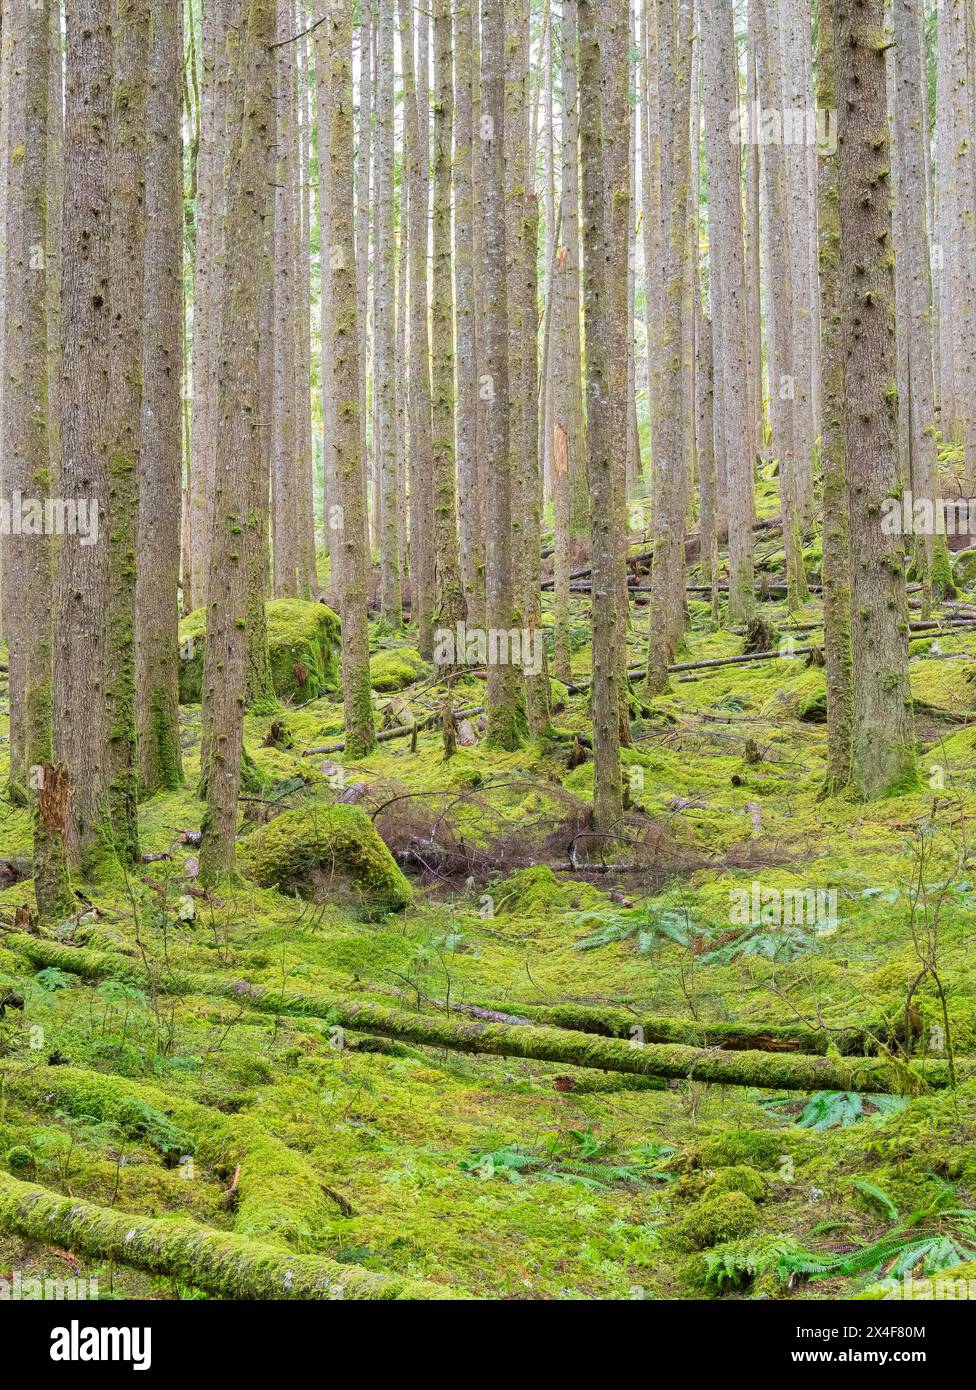 USA, Washington State. Central Cascades, Verdant moss covered understory in hemlock tree forest Stock Photo